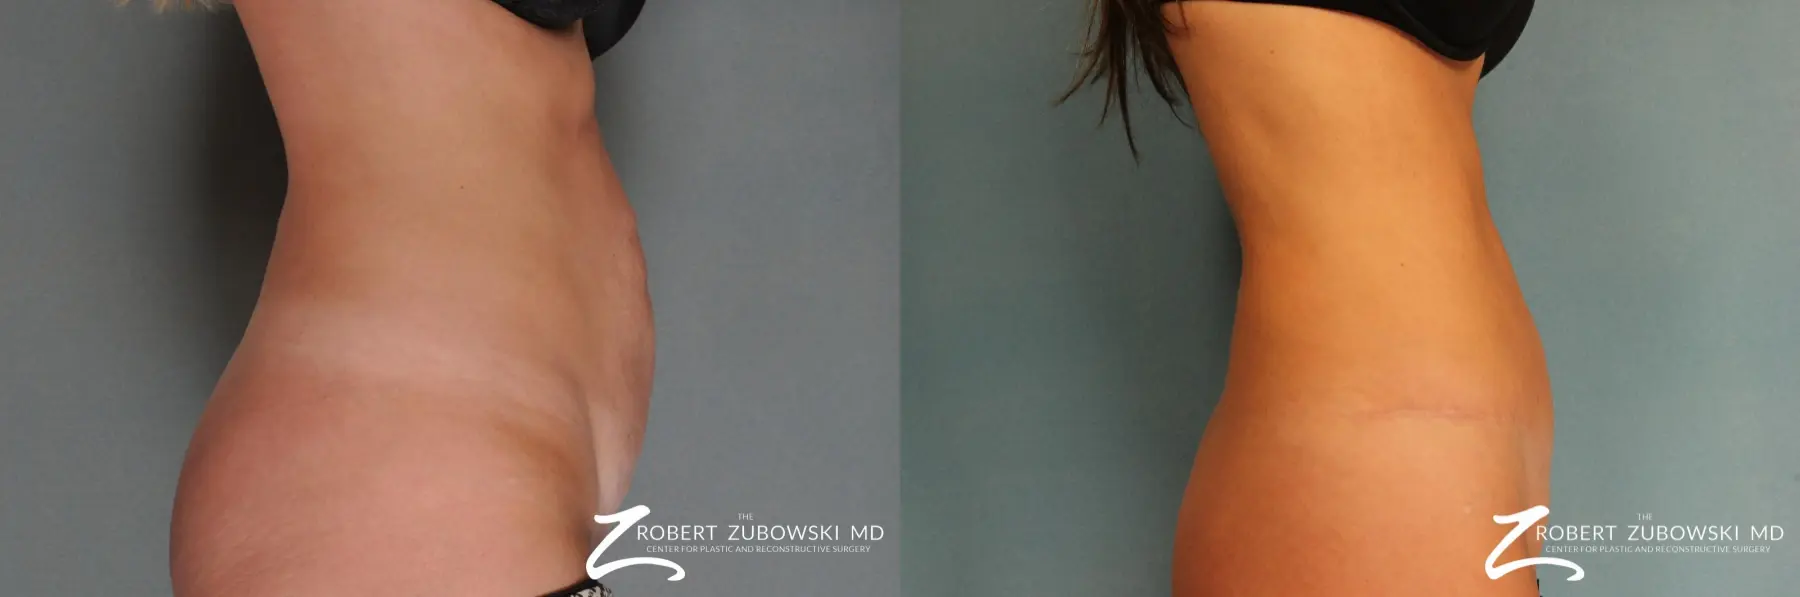 Tummy Tuck: Patient 12 - Before and After 2